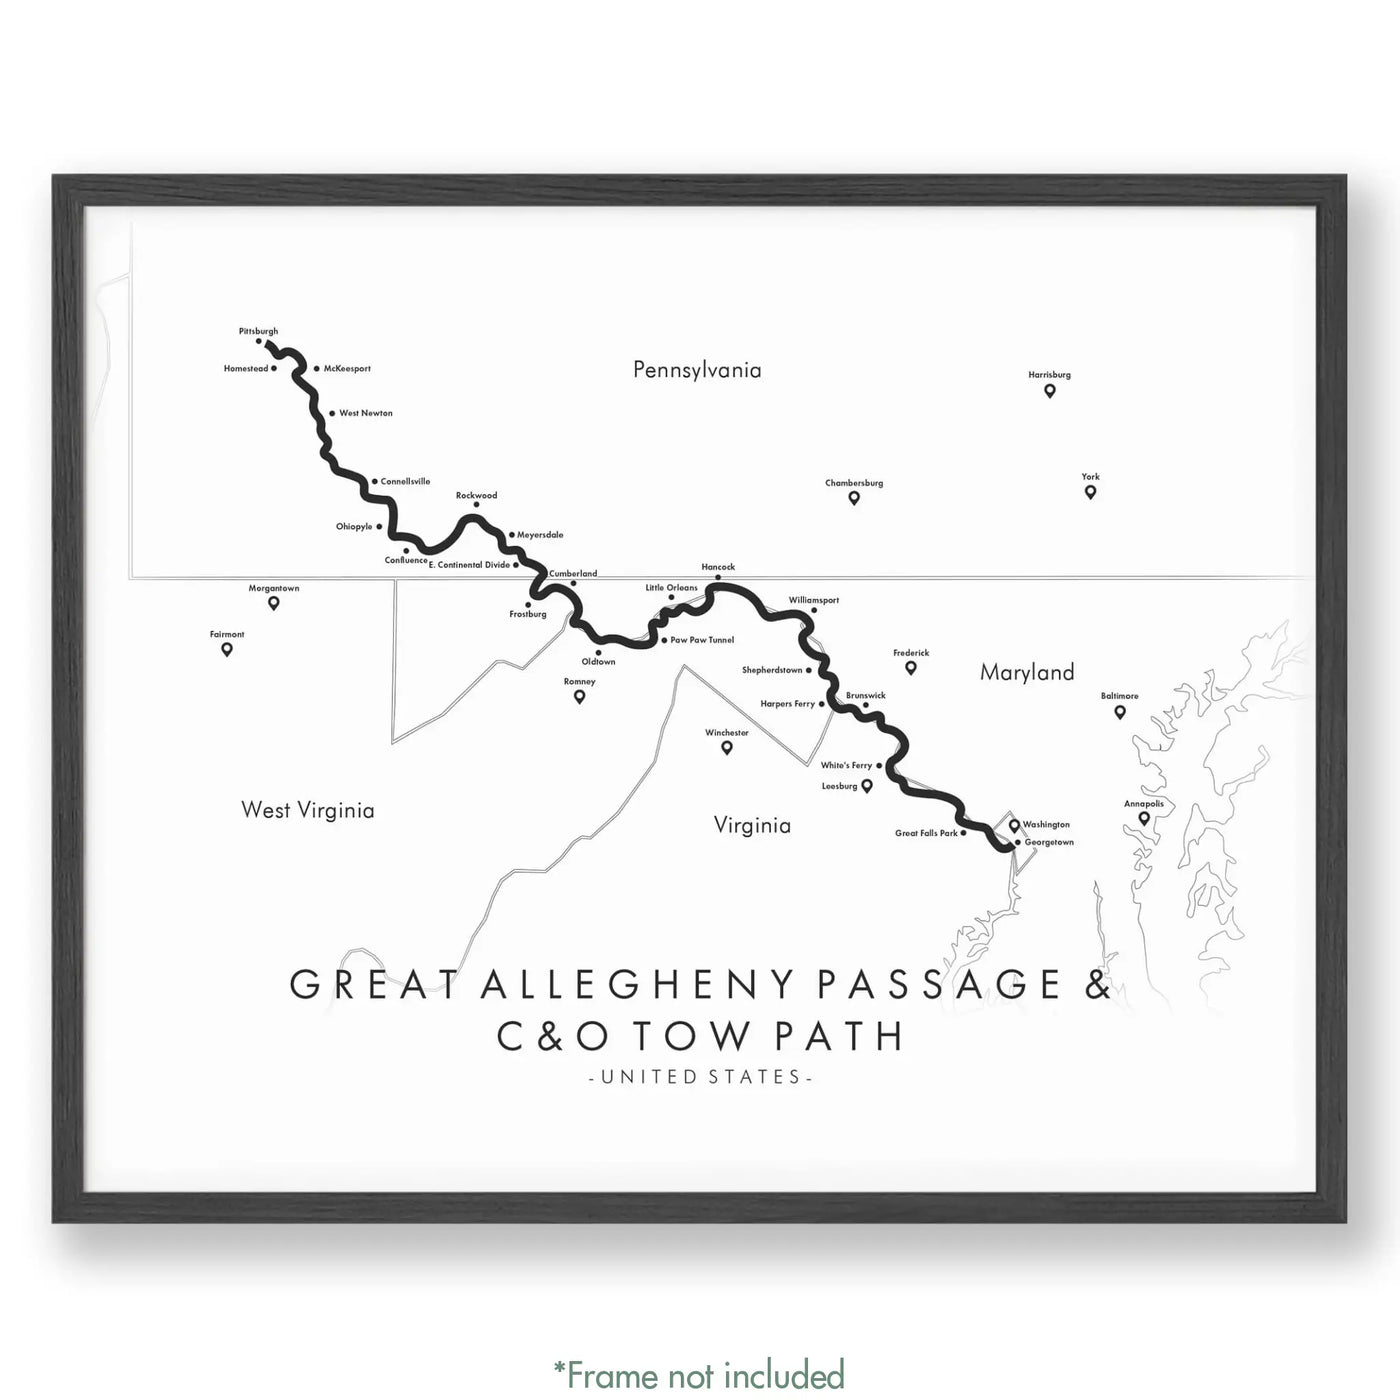 Trail Poster of Great Allegheny Passage & C&O Tow Path - White